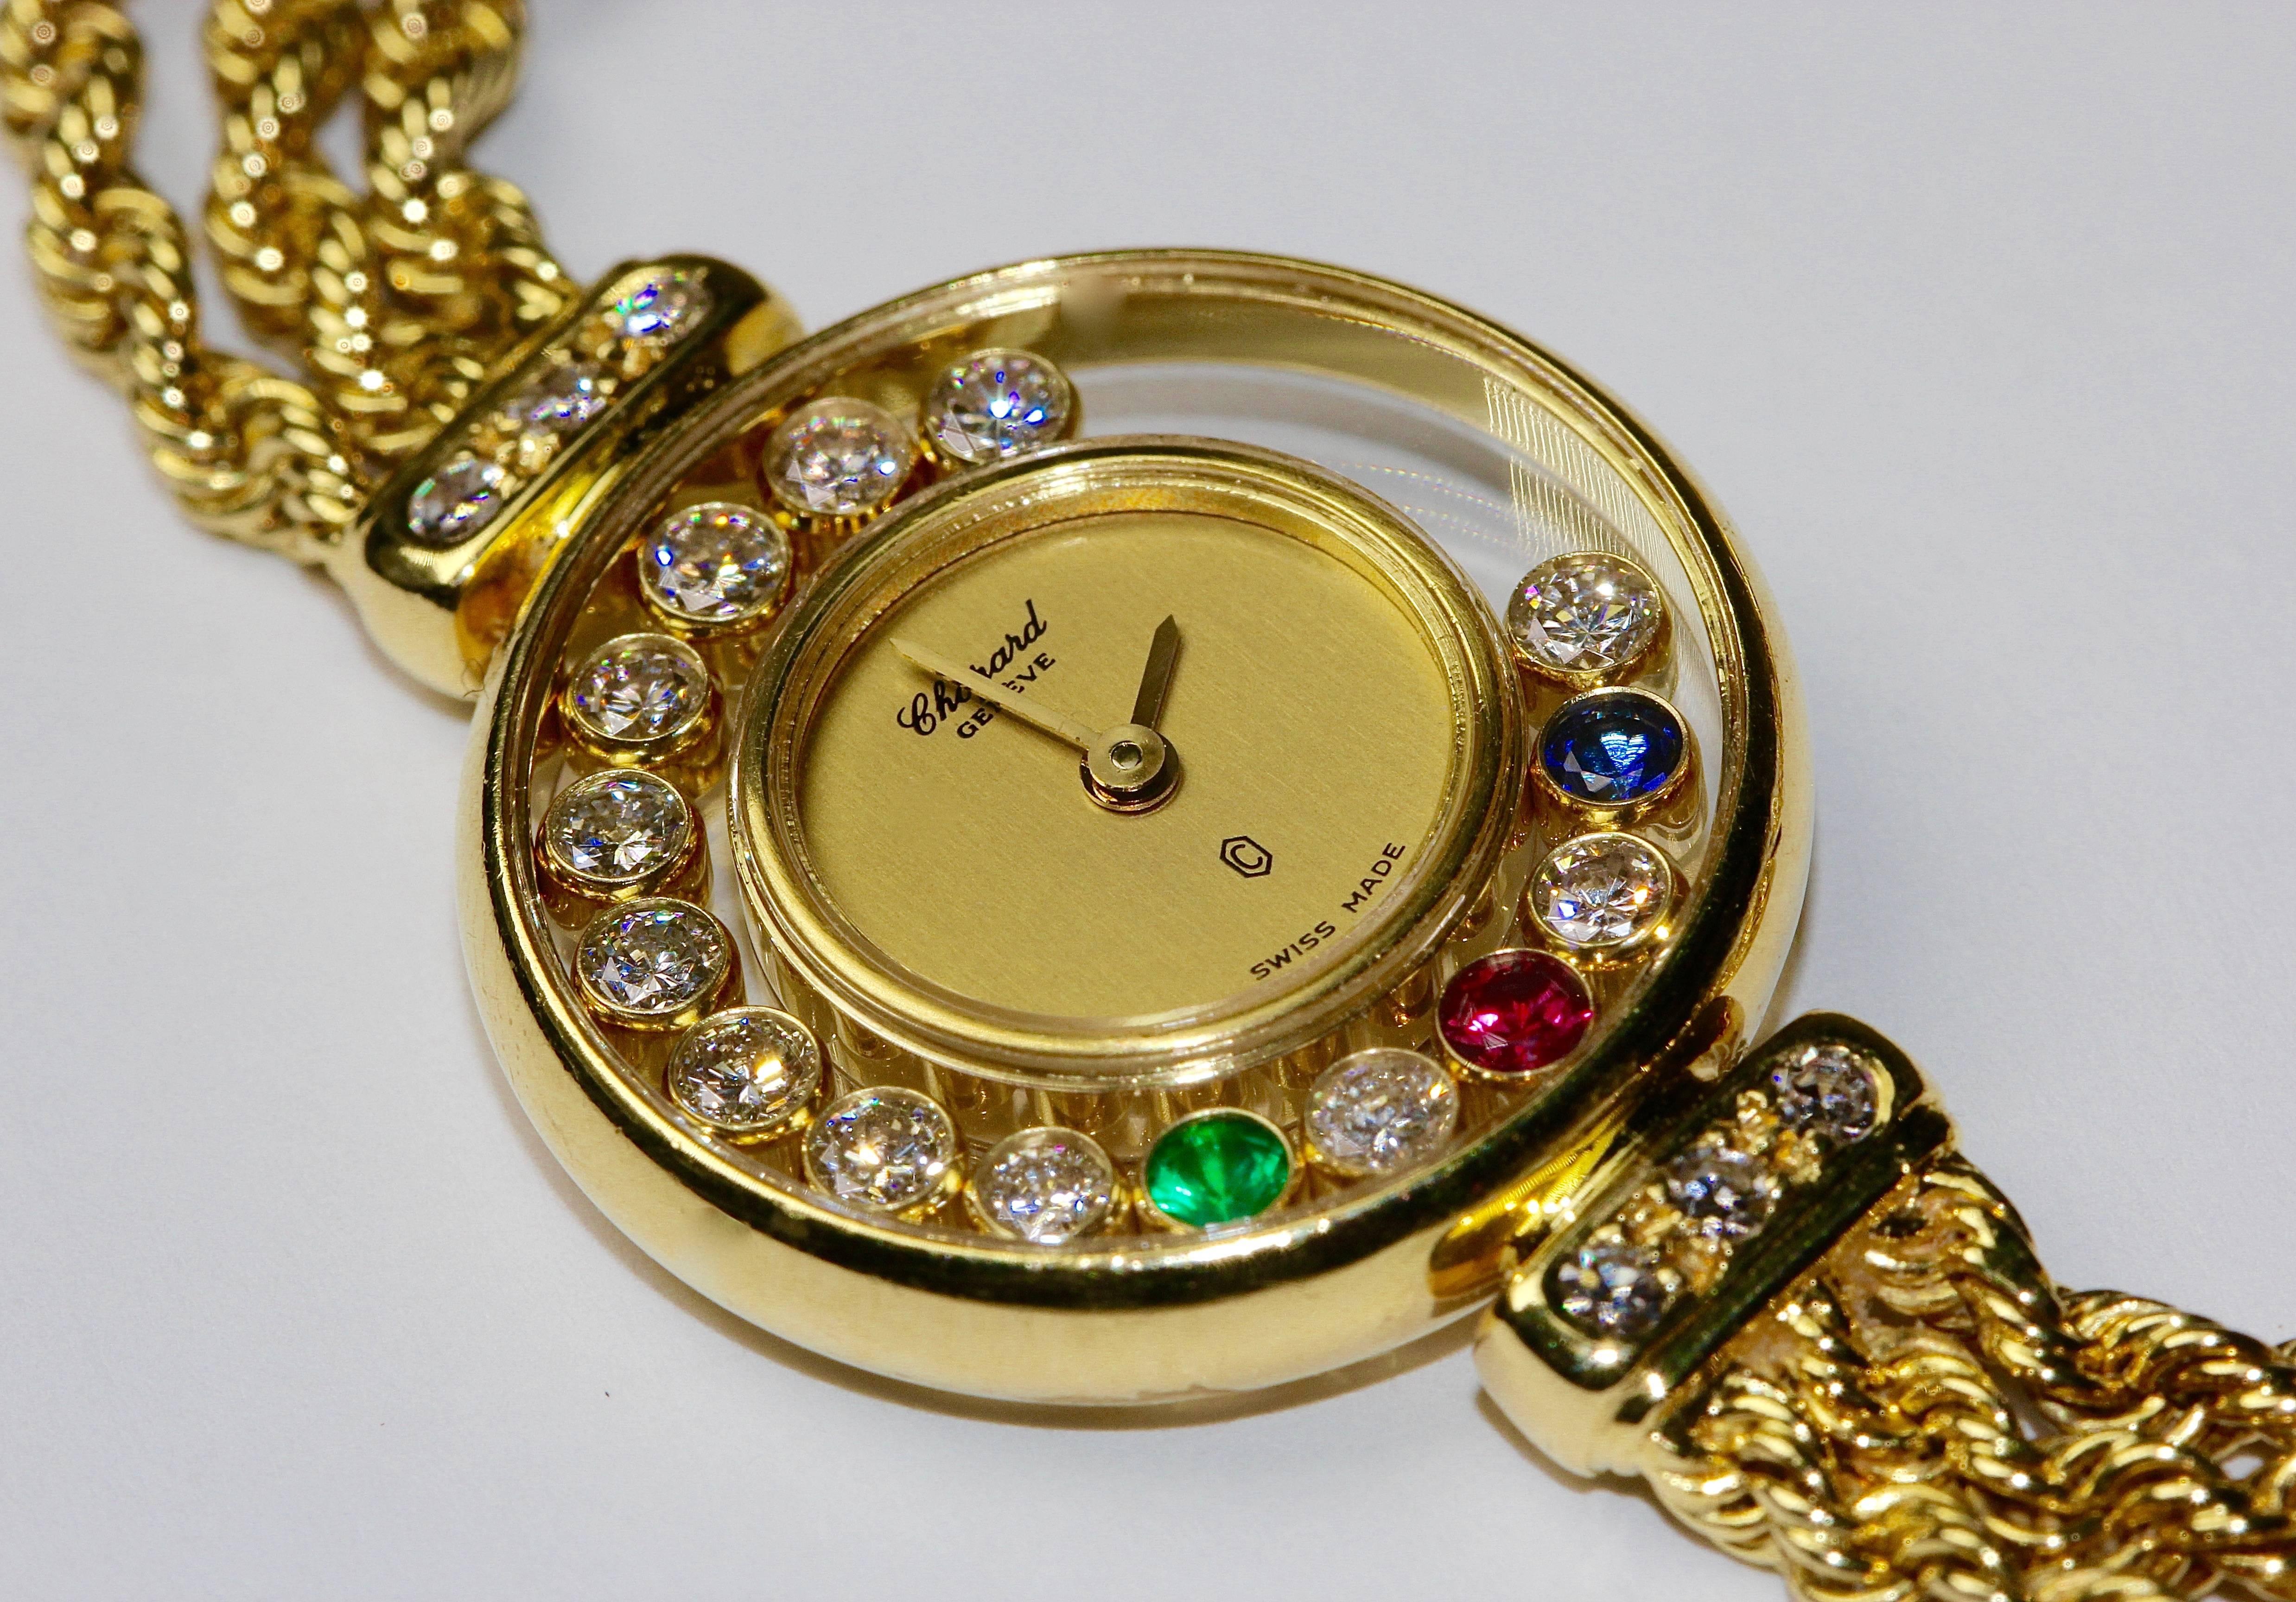 Beautiful and very fine ladies watch from Chopard. Completely made of 18k gold. Studded with many diamonds and one sapphire, ruby and emerald of top quality.

Total length about 180mm.